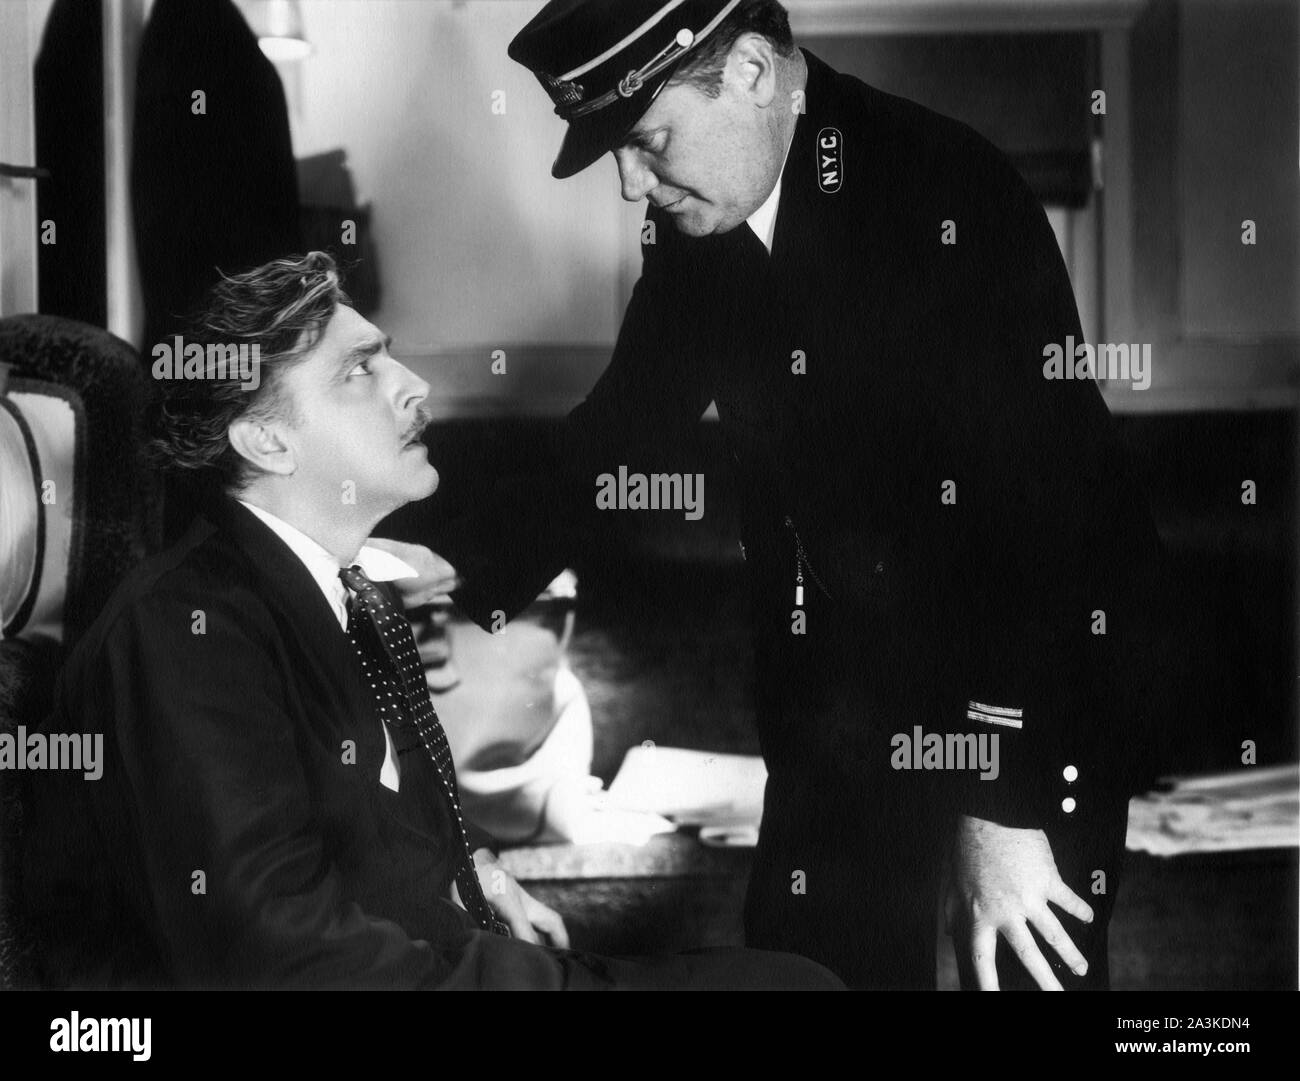 JOHN BARRYMORE as Oscar Jaffe and JAMES P. BURTIS in TWENTIETH CENTURY 1934 director HOWARD HAWKS screenplay BEN HECHT and CHARLES MacARTHUR Columbia Pictures Stock Photo